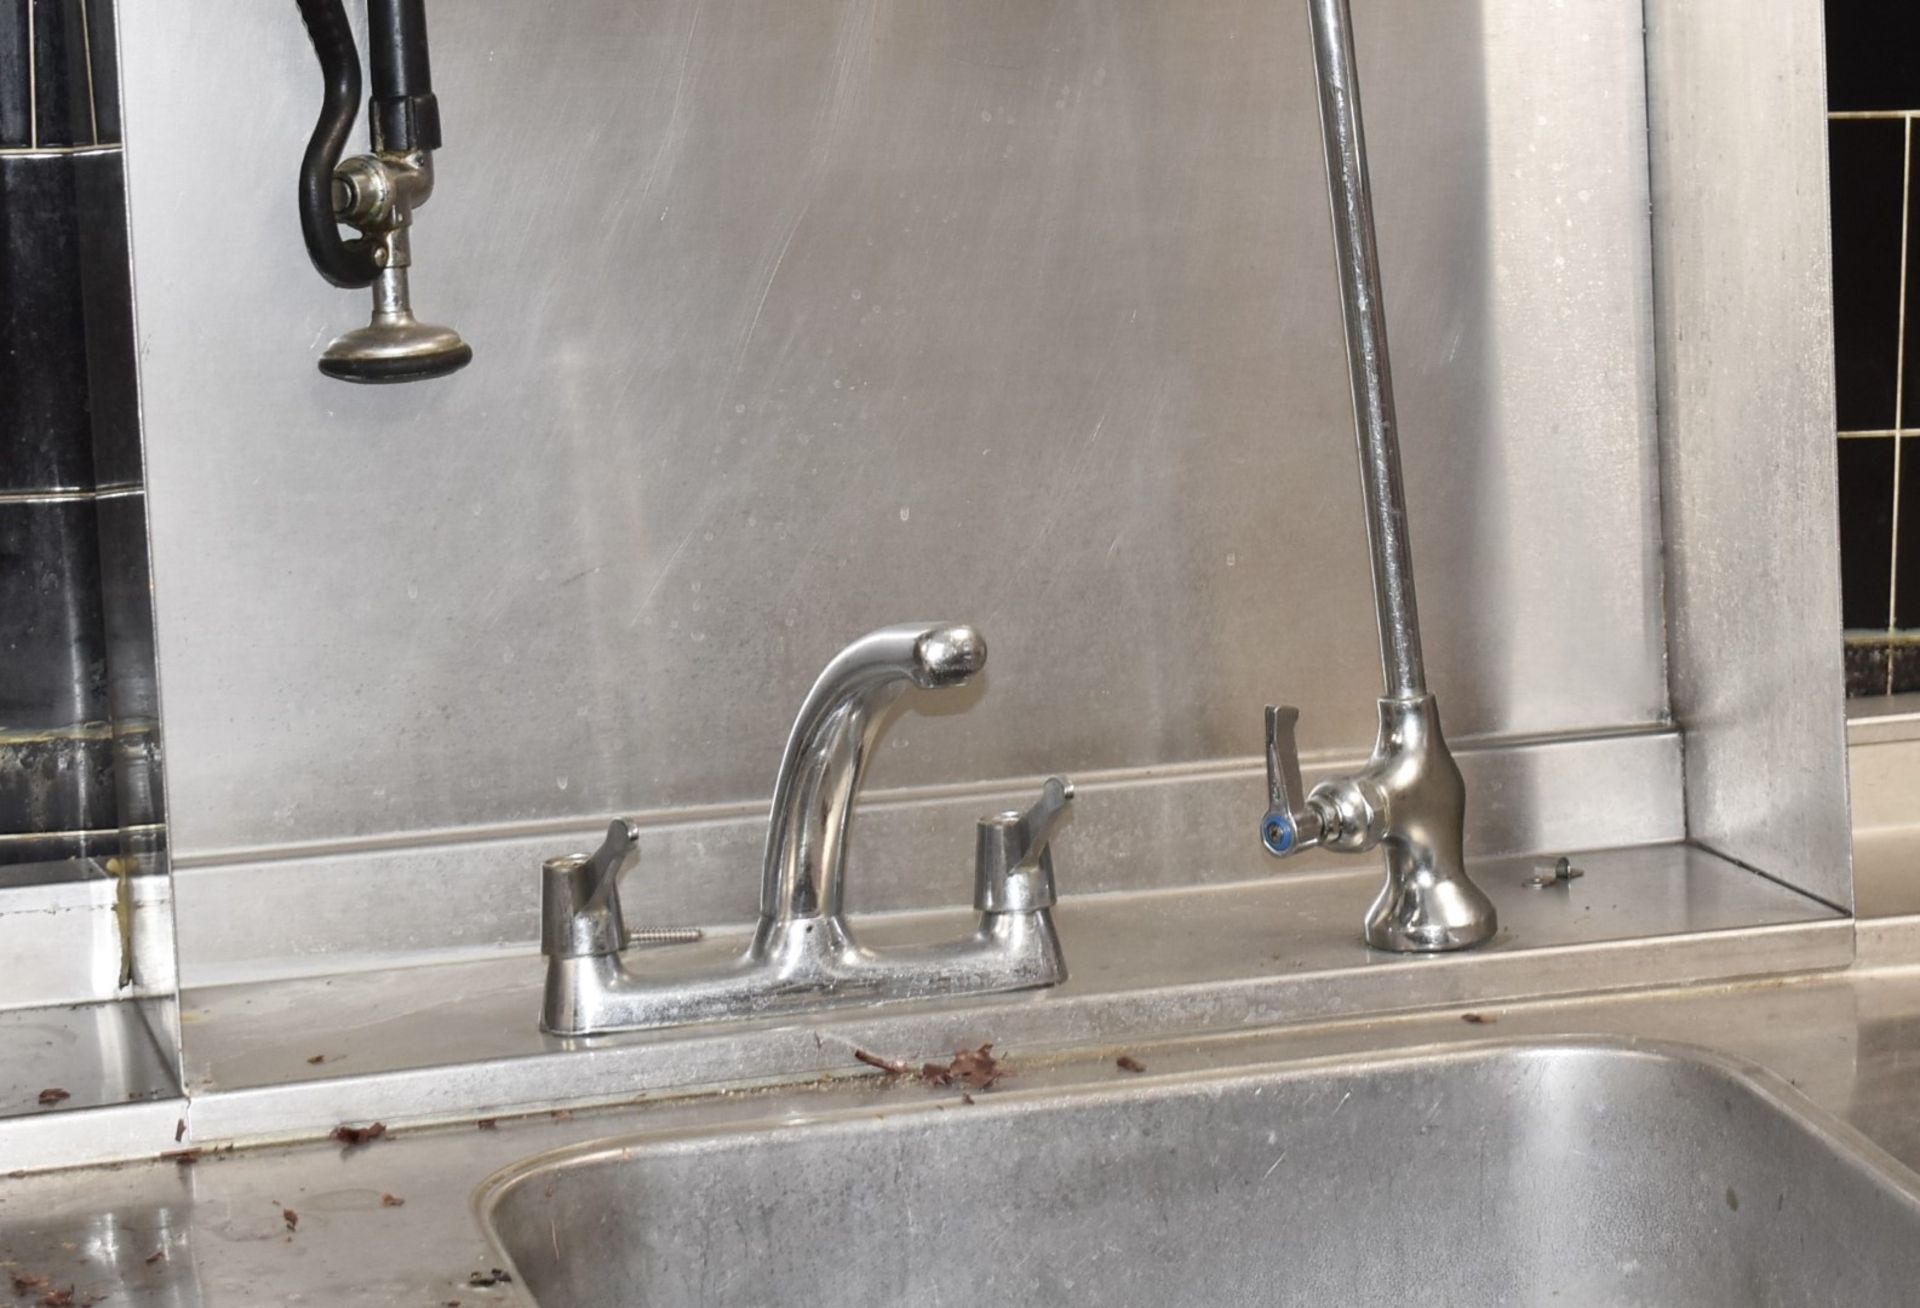 1 x Commercial Stainless Steel Passthrough Inlet and Outlet Tables With Wash Basin and Spray Hose - Image 3 of 6